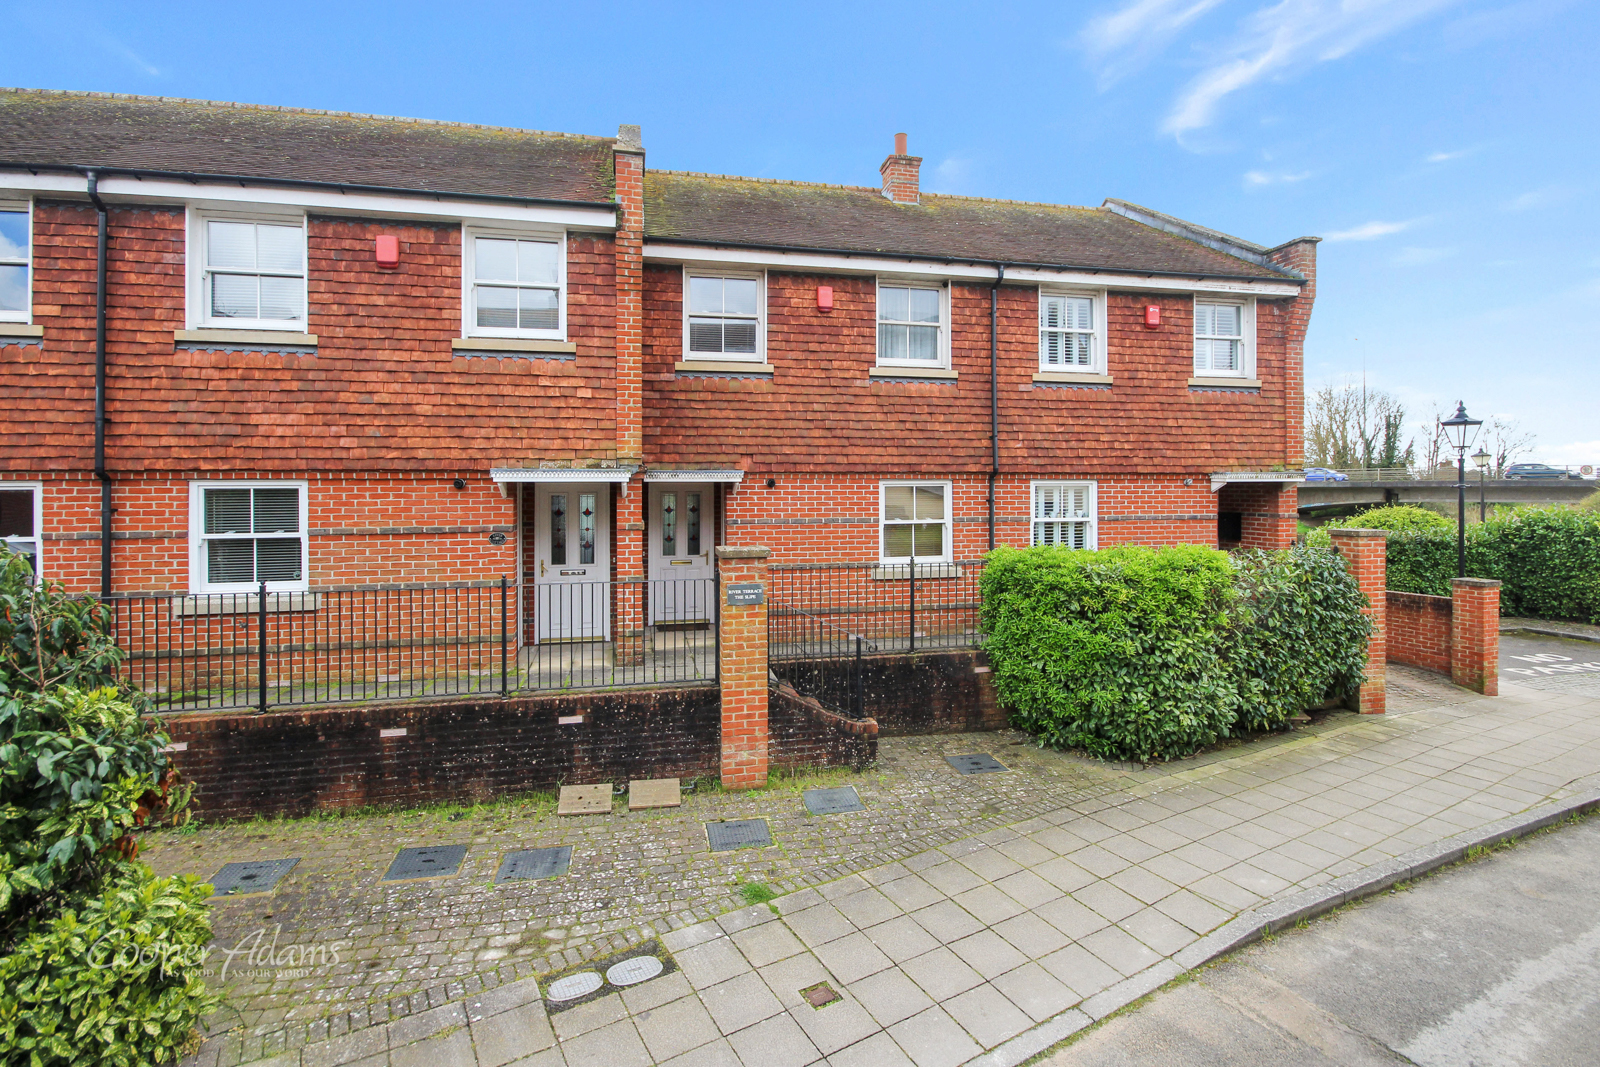 2 bed house for sale in River Terrace, Arundel - Property Image 1